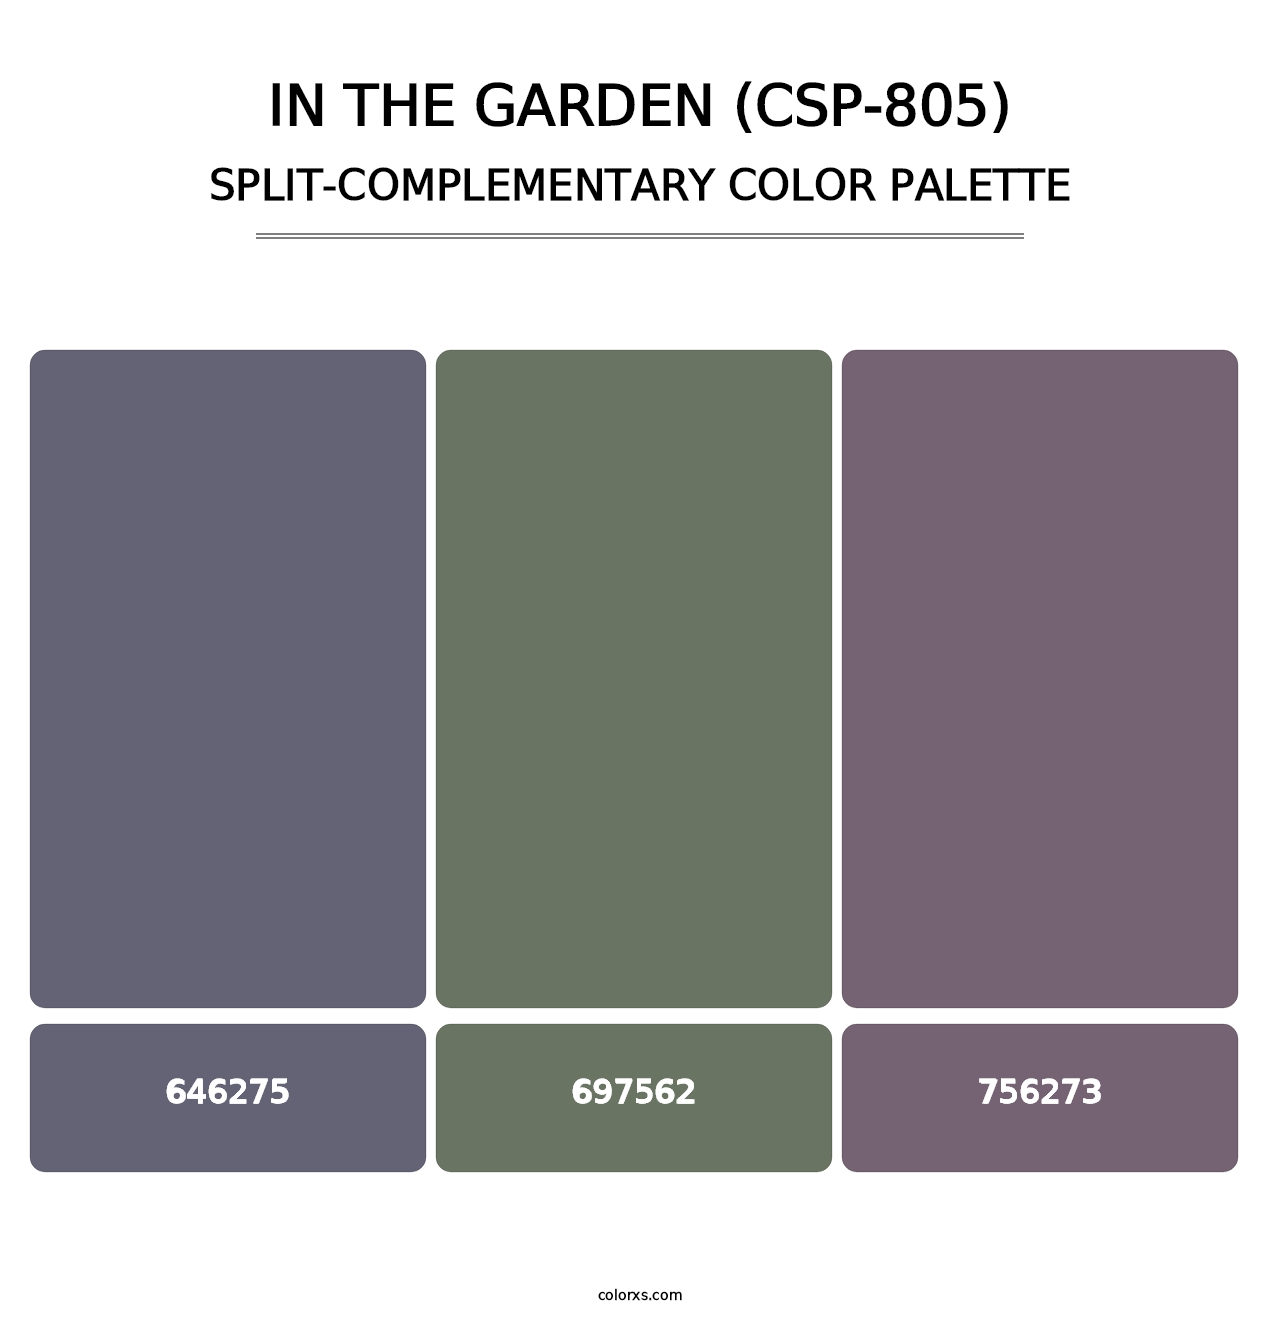 In the Garden (CSP-805) - Split-Complementary Color Palette